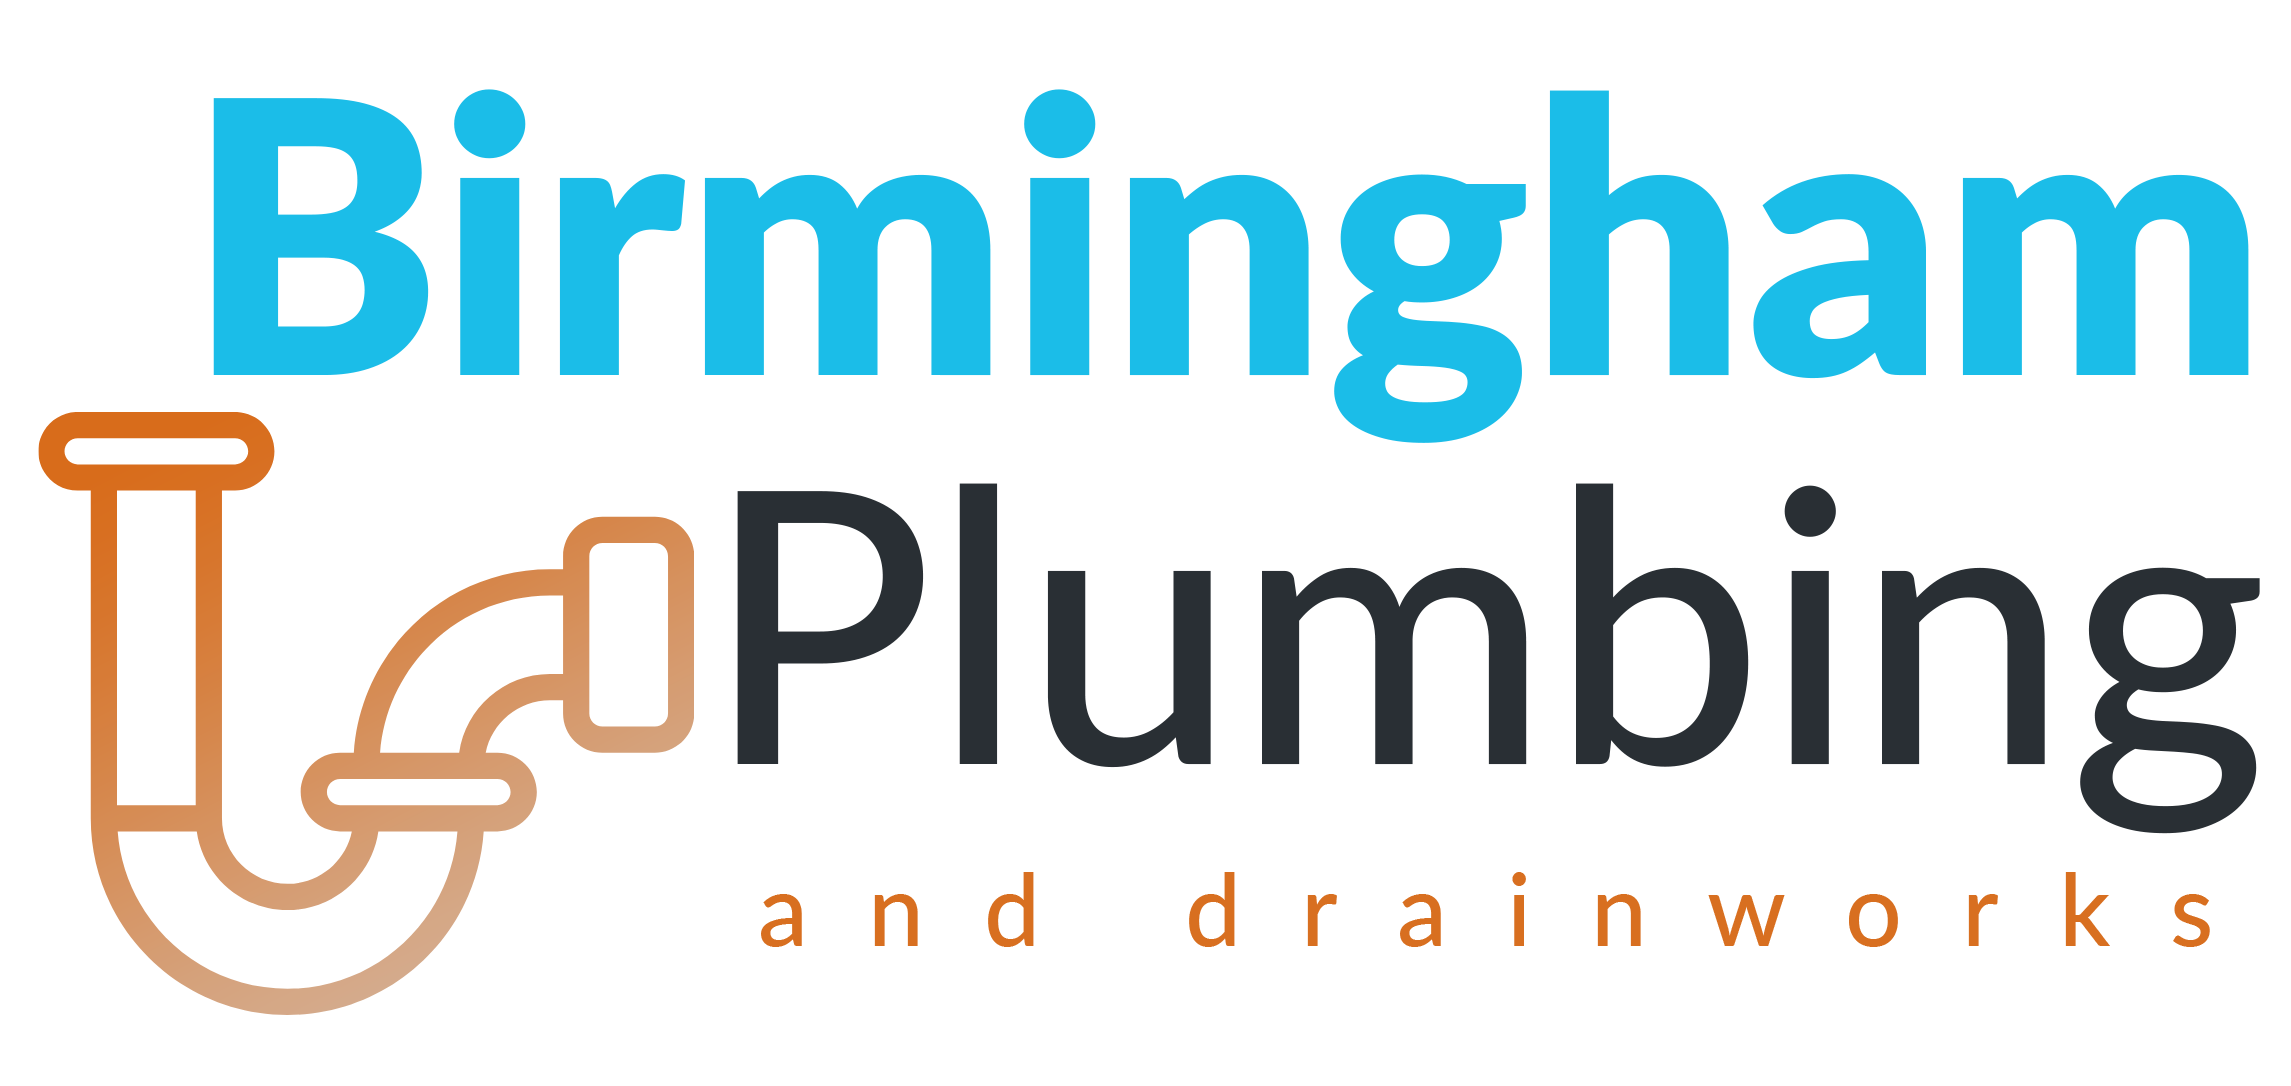 Birmingham Plumbing and Drainworks Launches New Website, Offers Trenchless Pipe Installations Throughout Birmingham Area